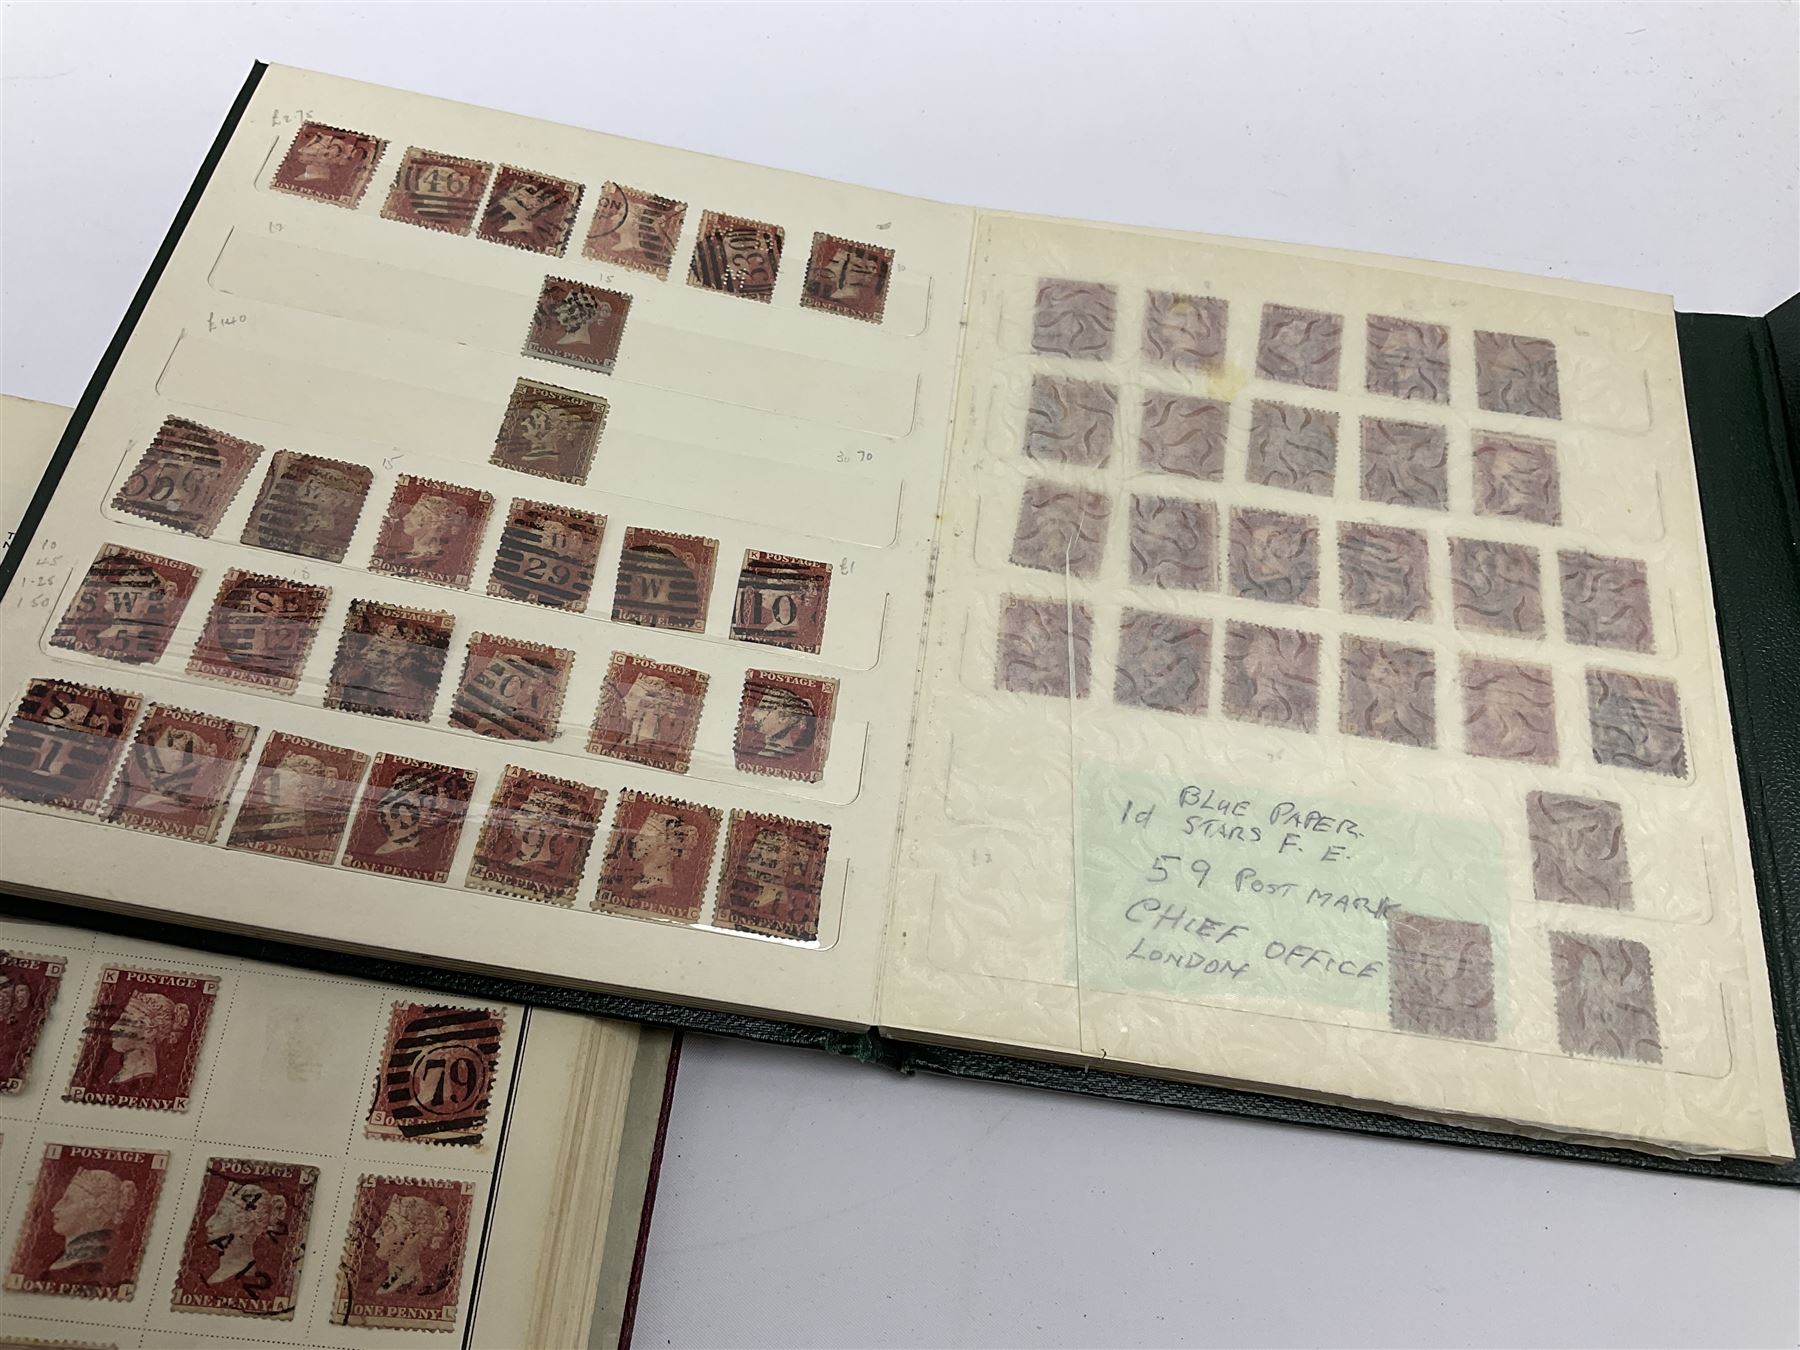 Great British Queen Victoria and later stamps including imperf penny reds with a few MX cancel examp - Image 7 of 9